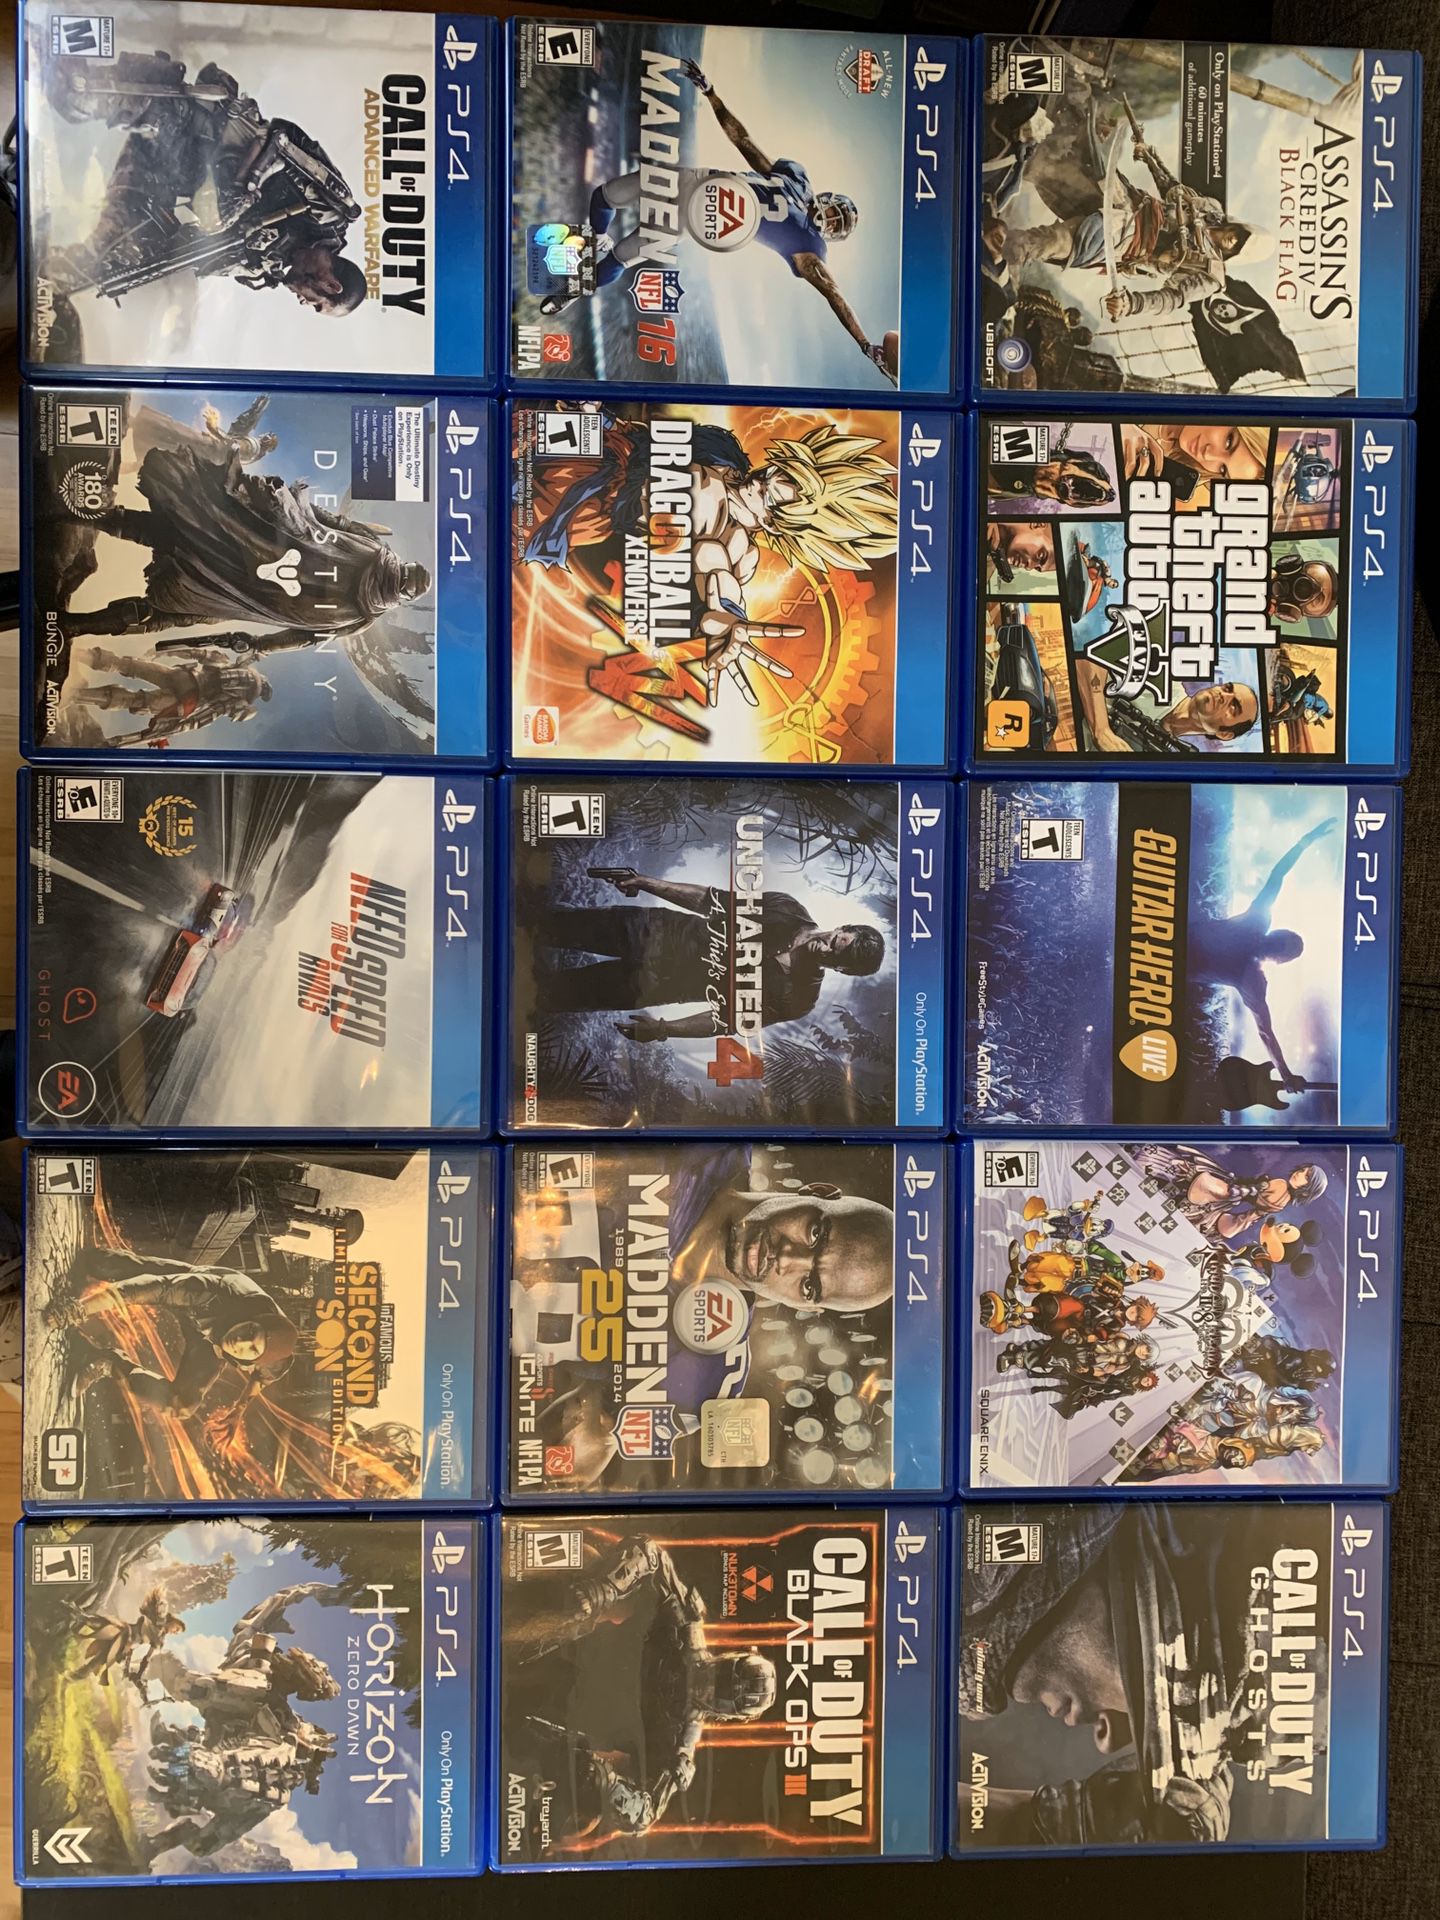 Playstation 4 Video Games